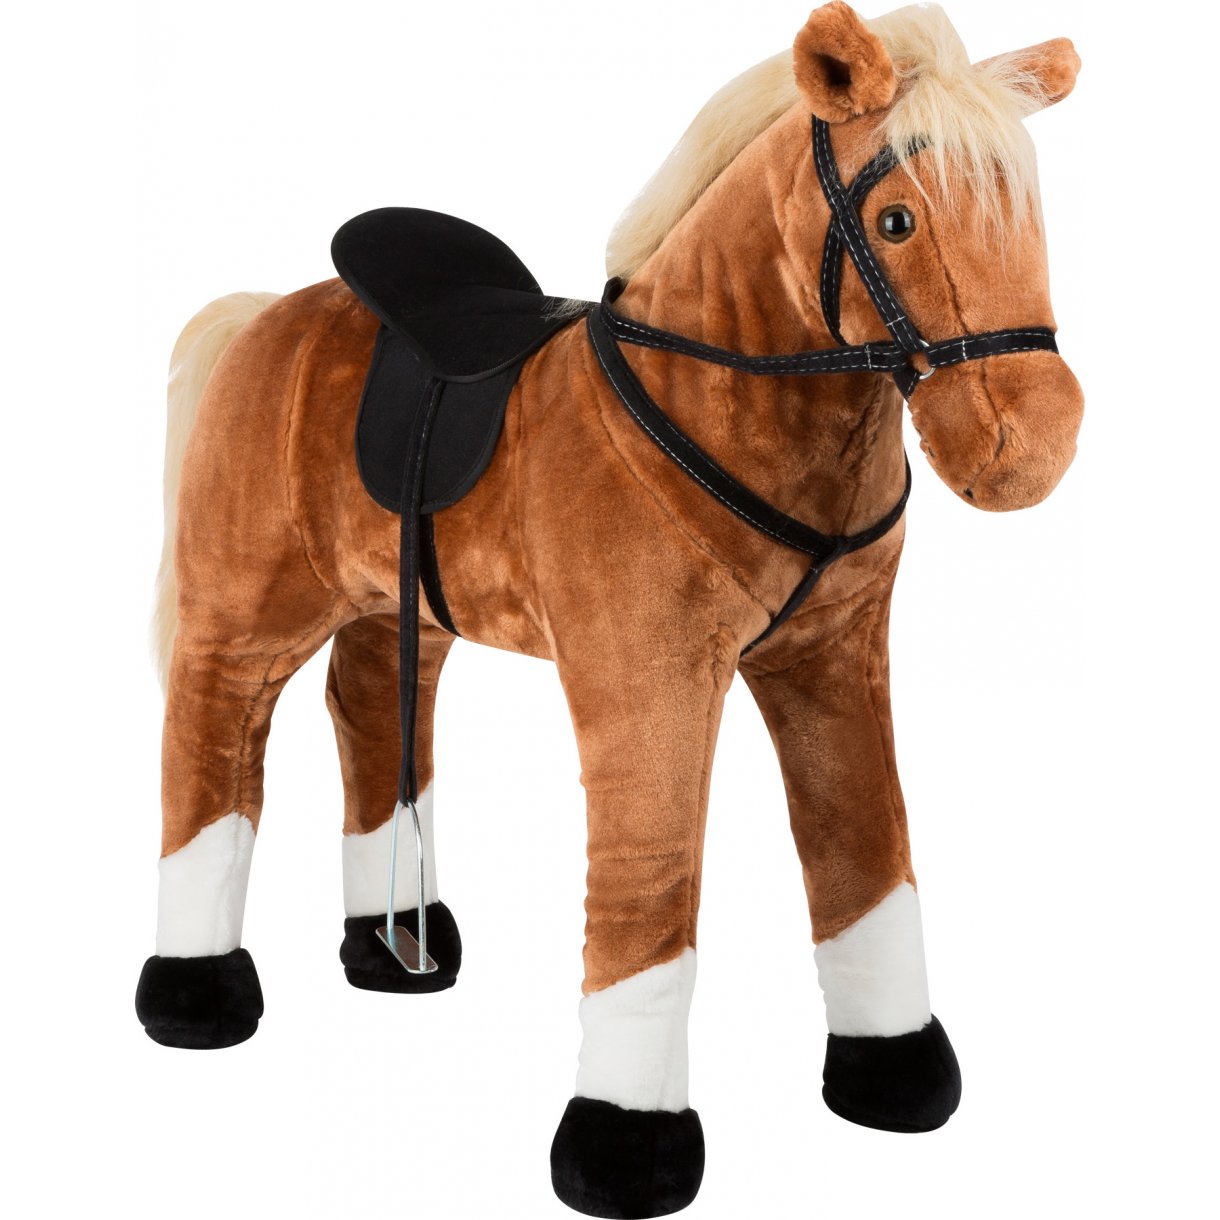 LG-11177-standing-hobby-horse-with-sound-brown-1.w1220.h1220.fill[1].jpg